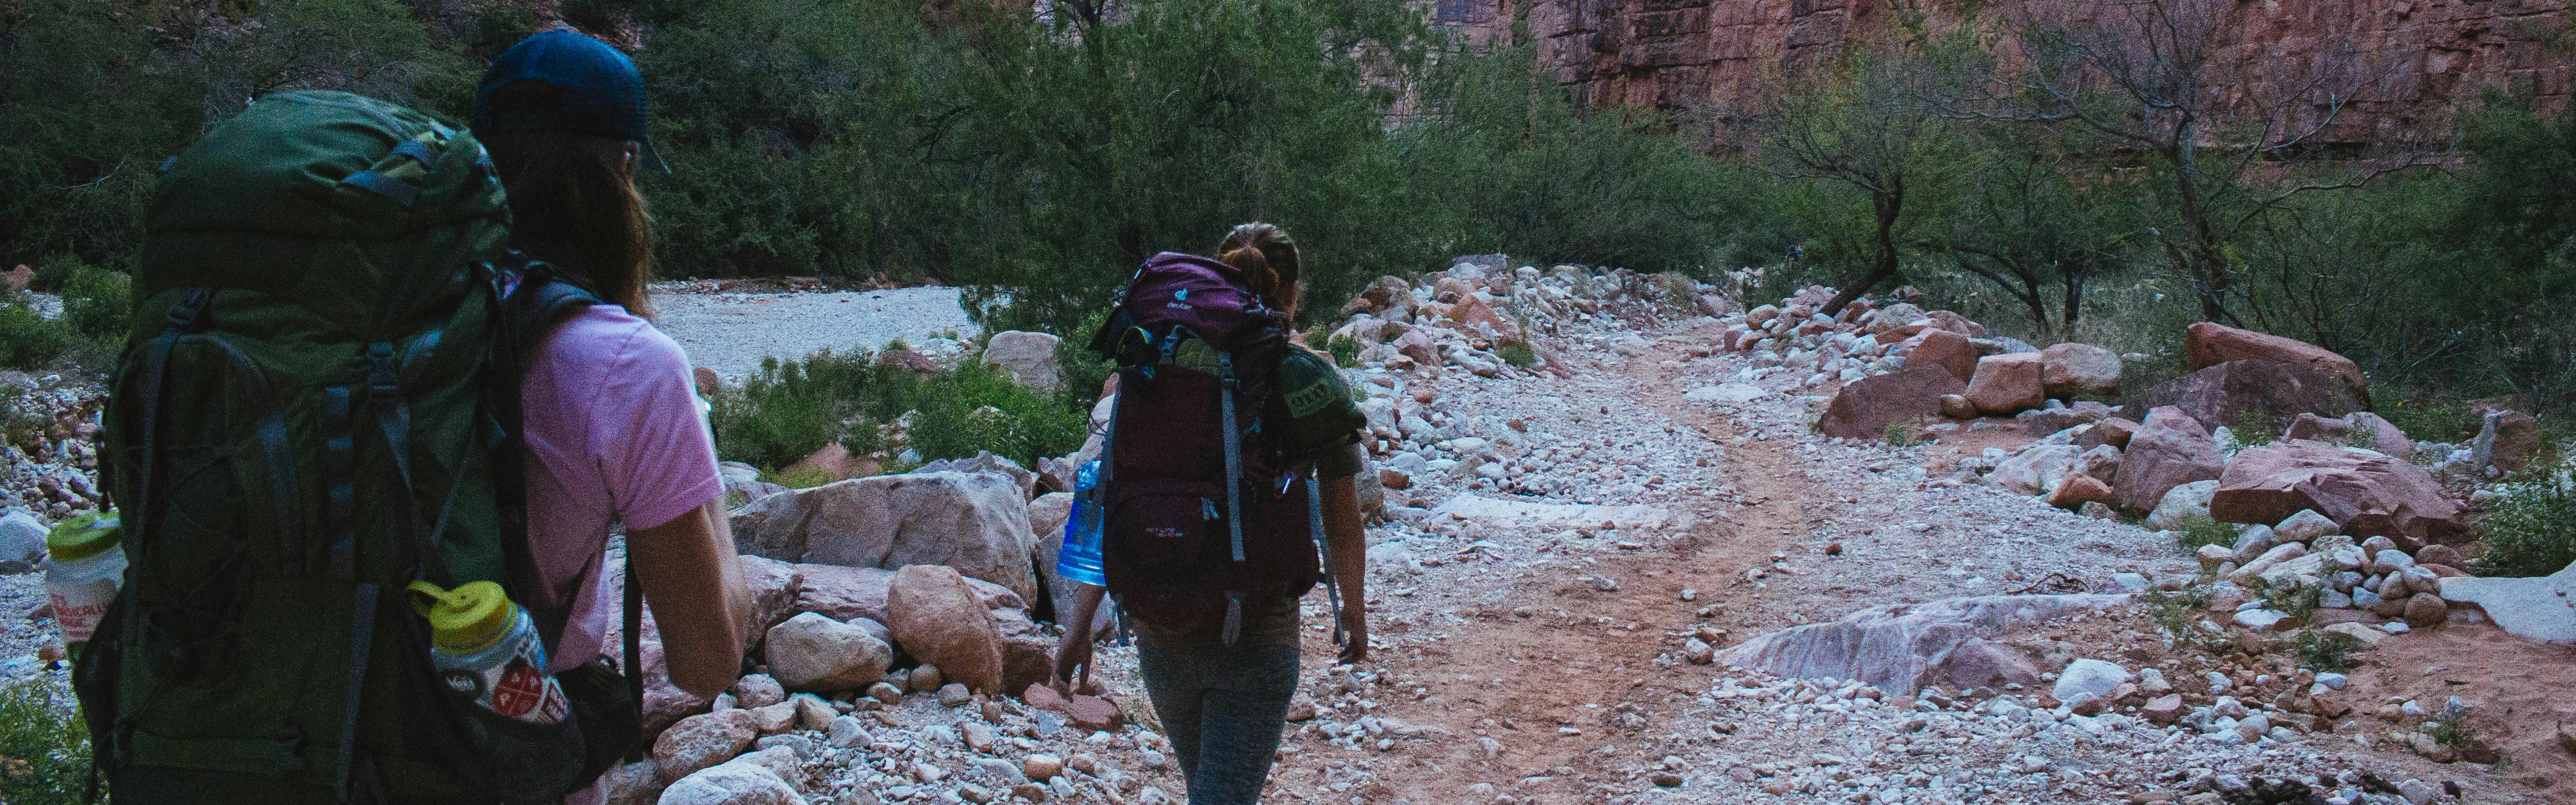 Two women walk down a rocky trail with large packs on their backs